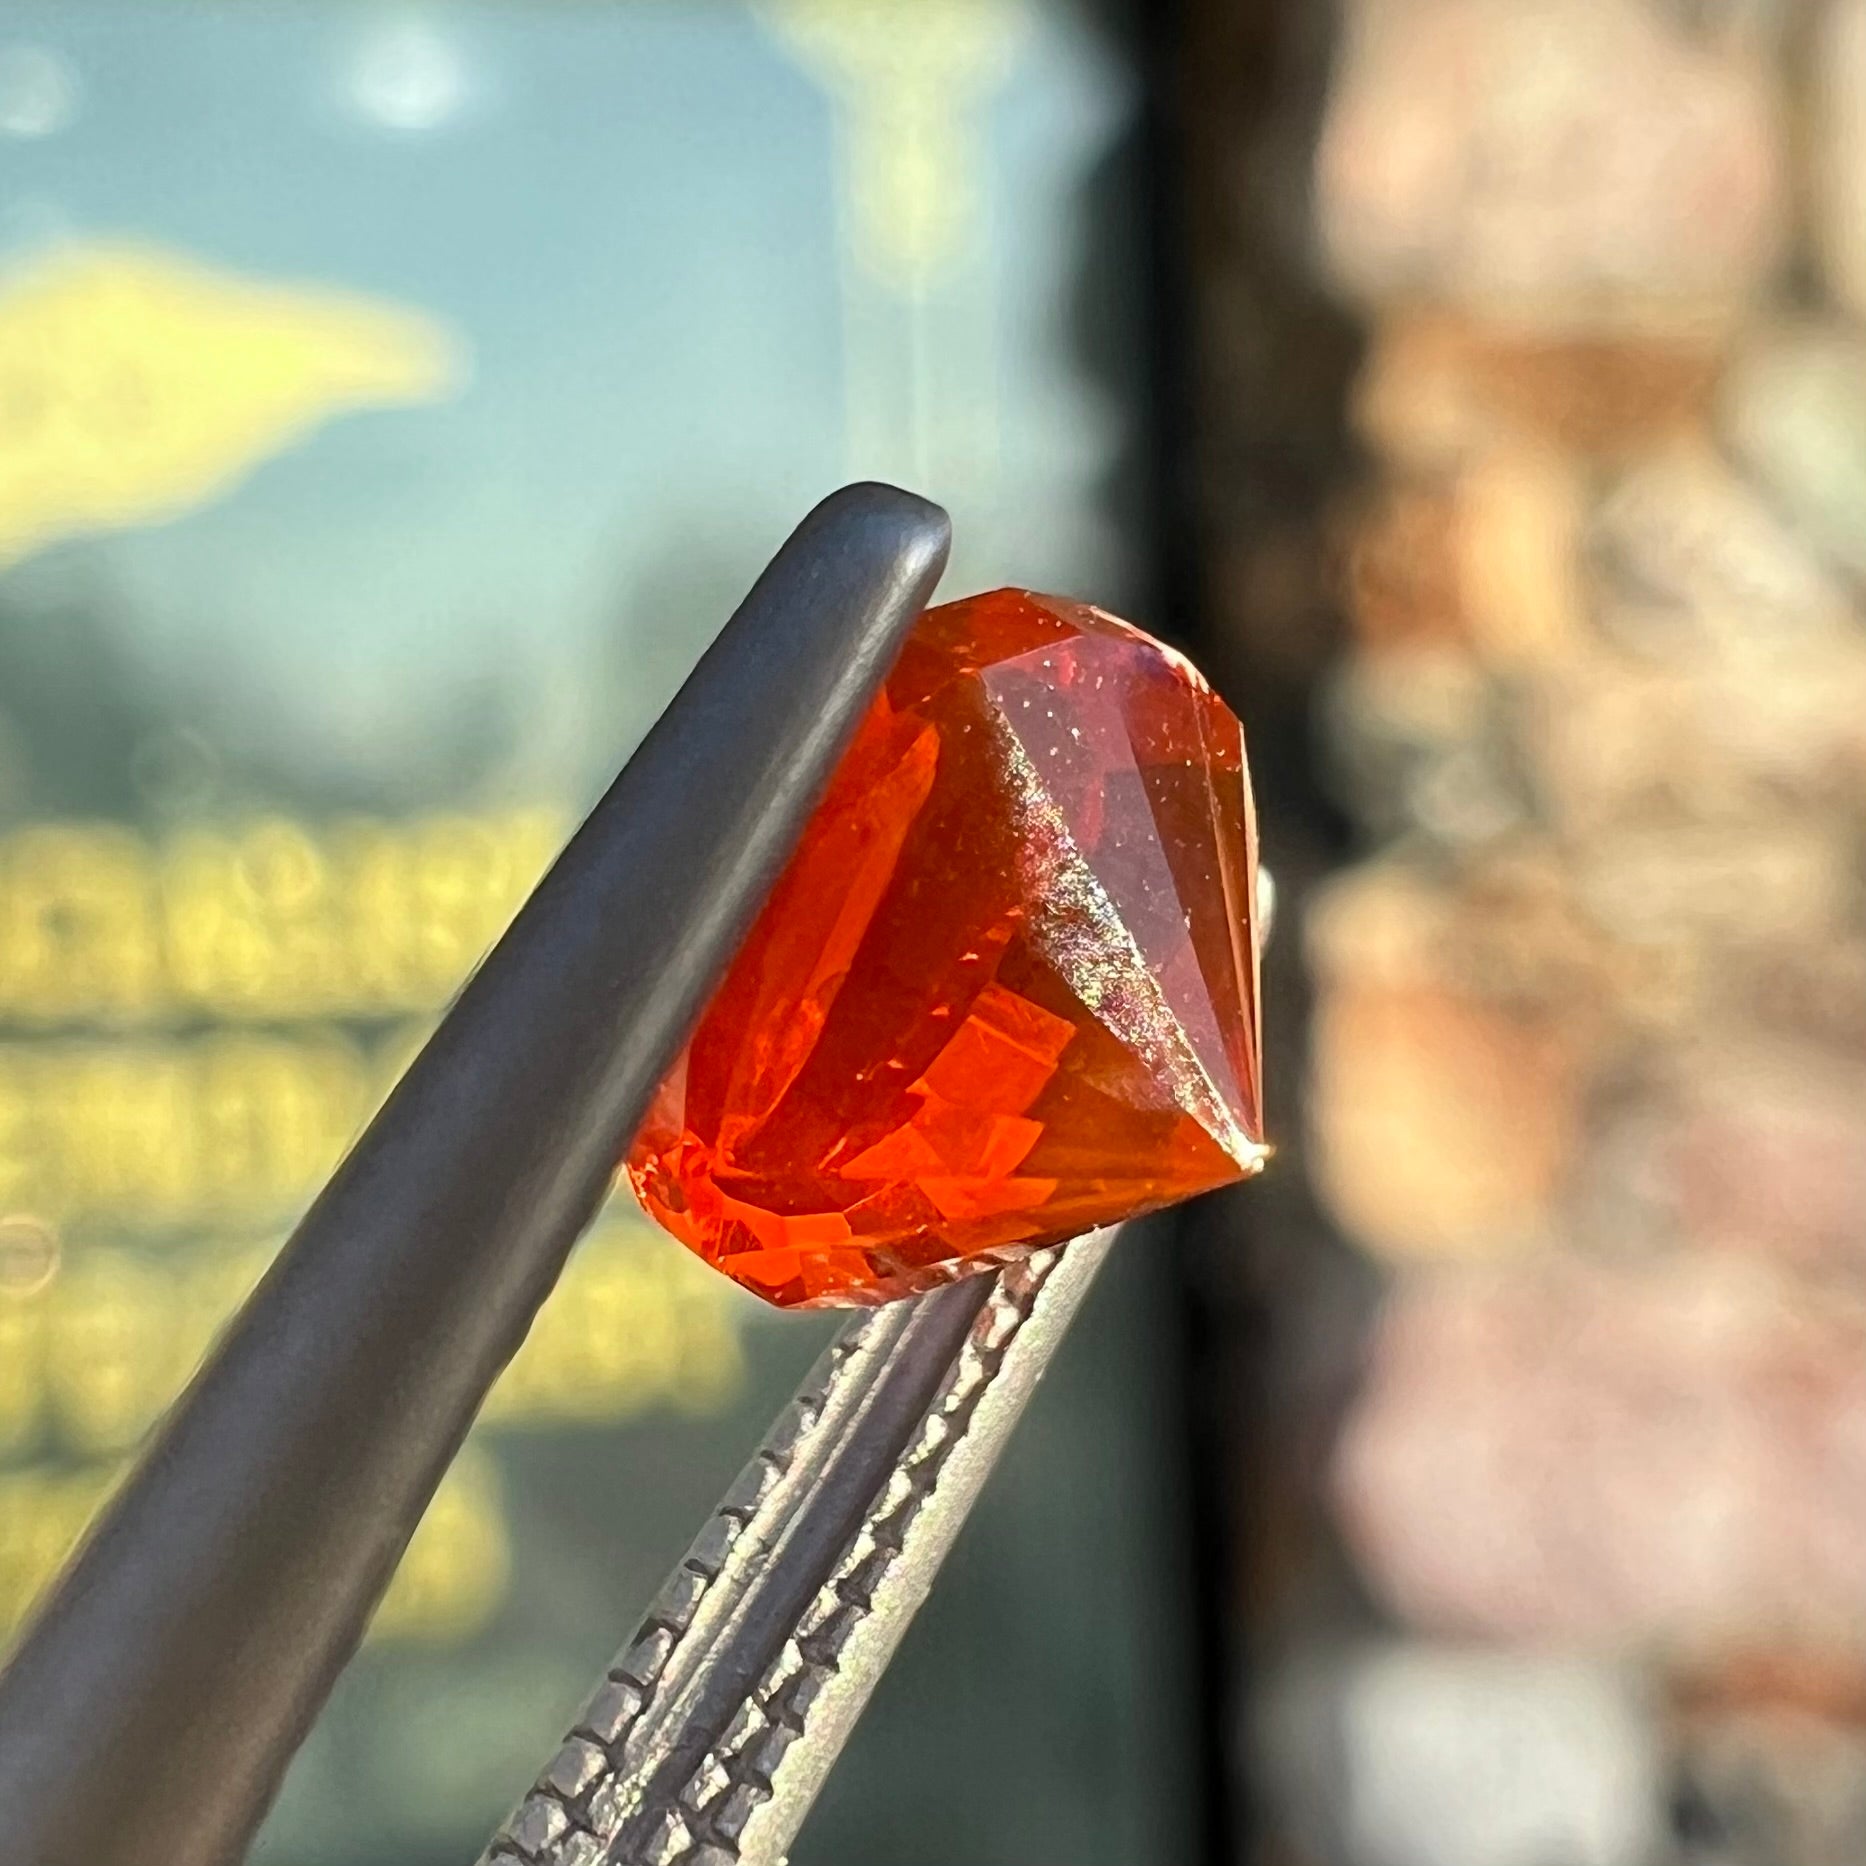 A faceted round cut natural Mexican fire opal stone.  The stone is bright orange in color.